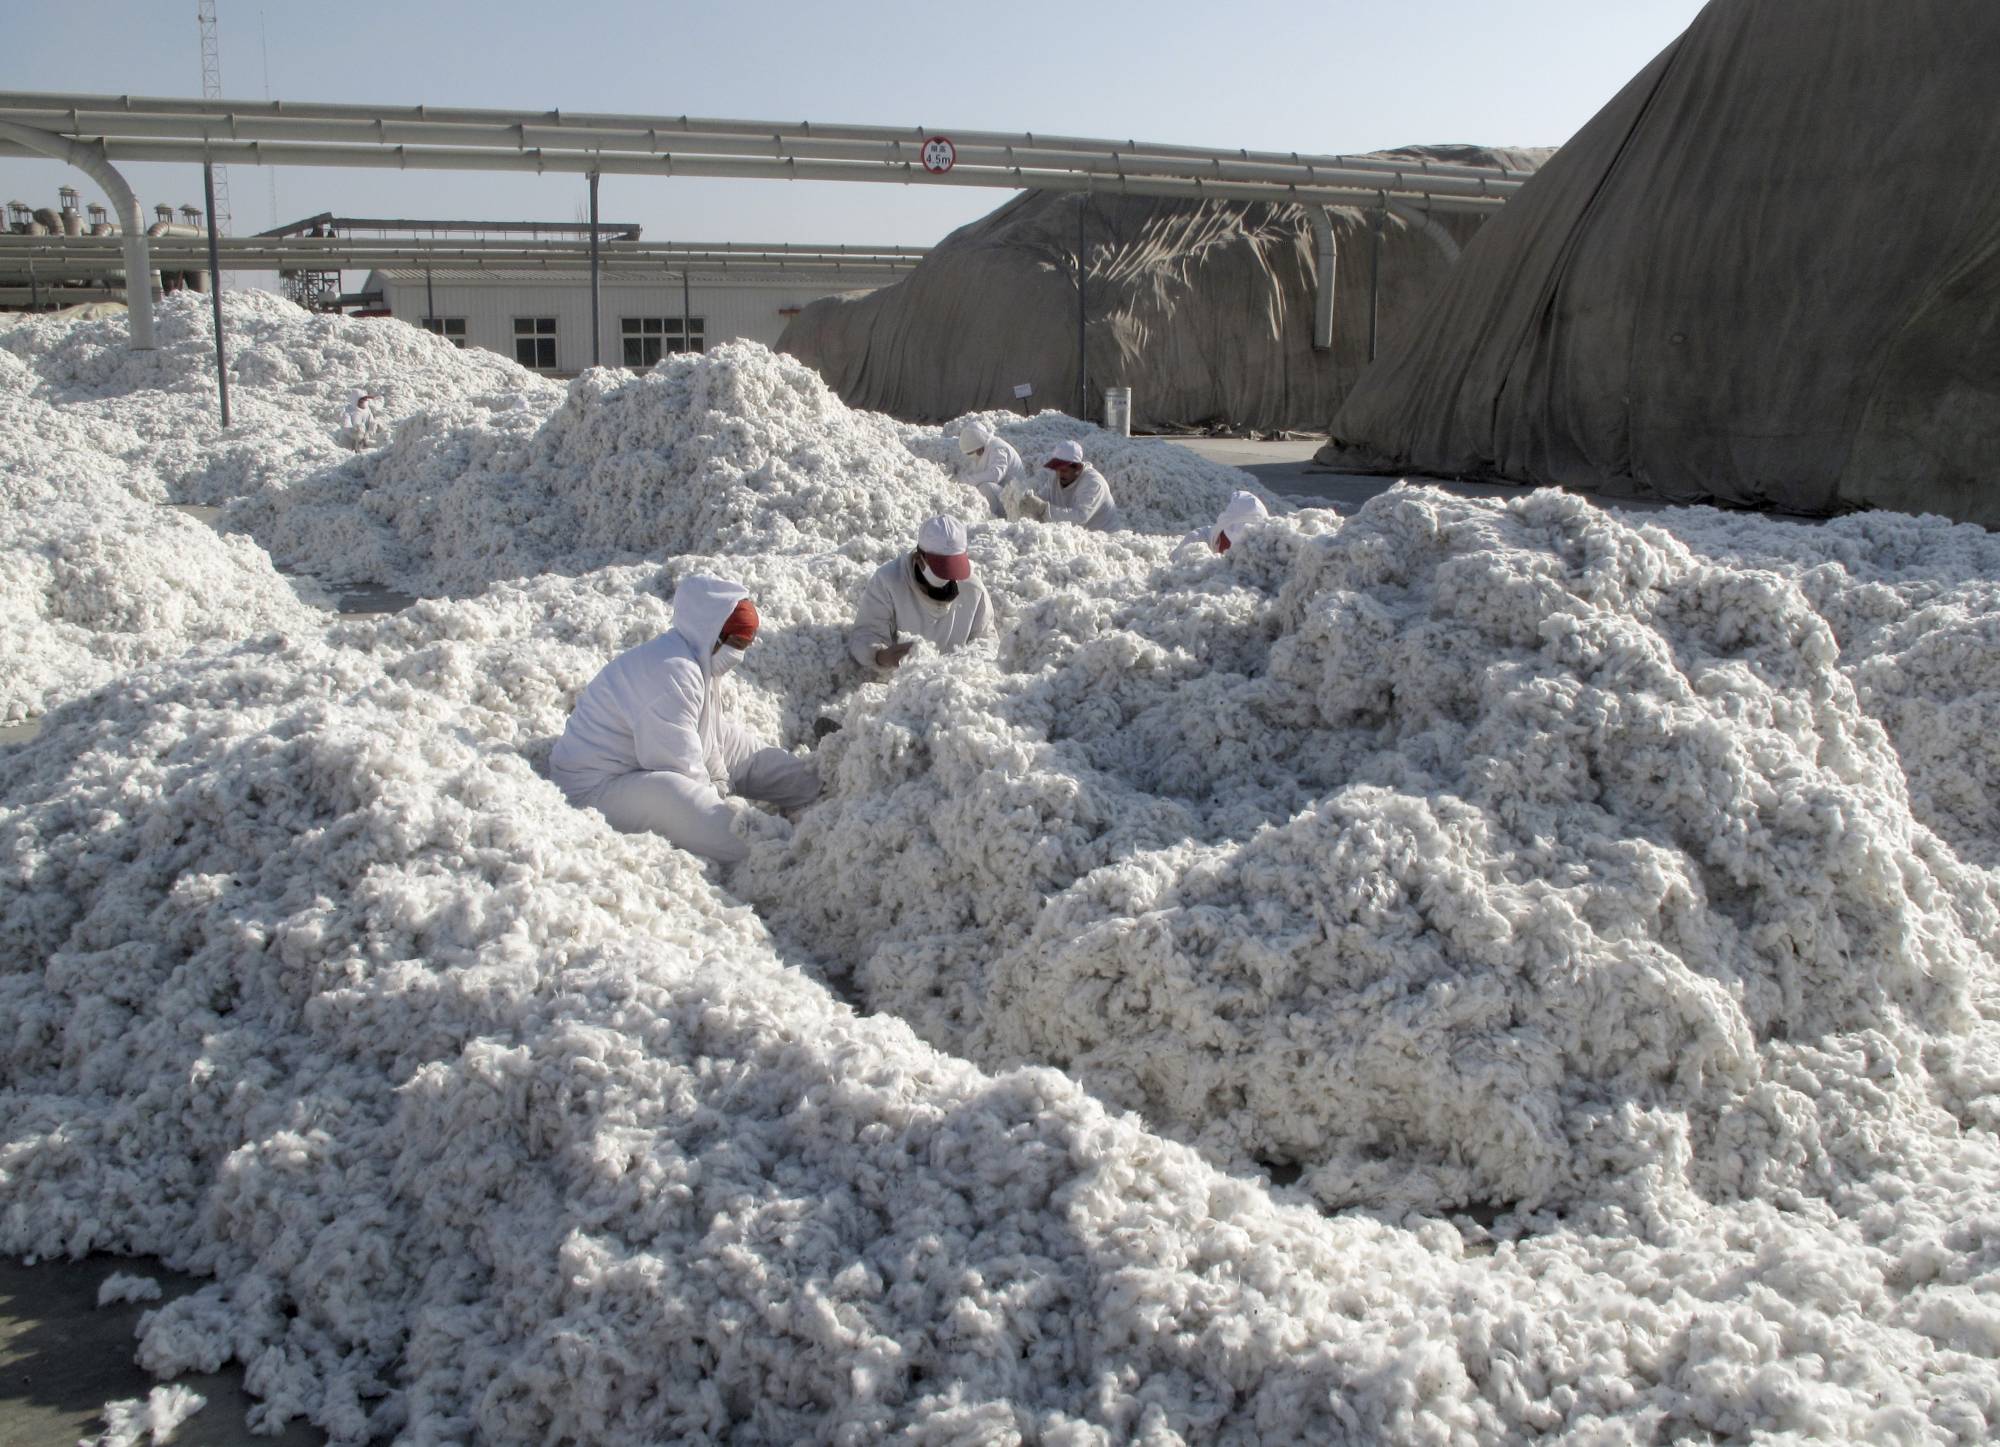 Workers look for trash in newly harvested cotton at a processing plant in Aksu, China's Xinjiang region, in December 2015. | REUTERS